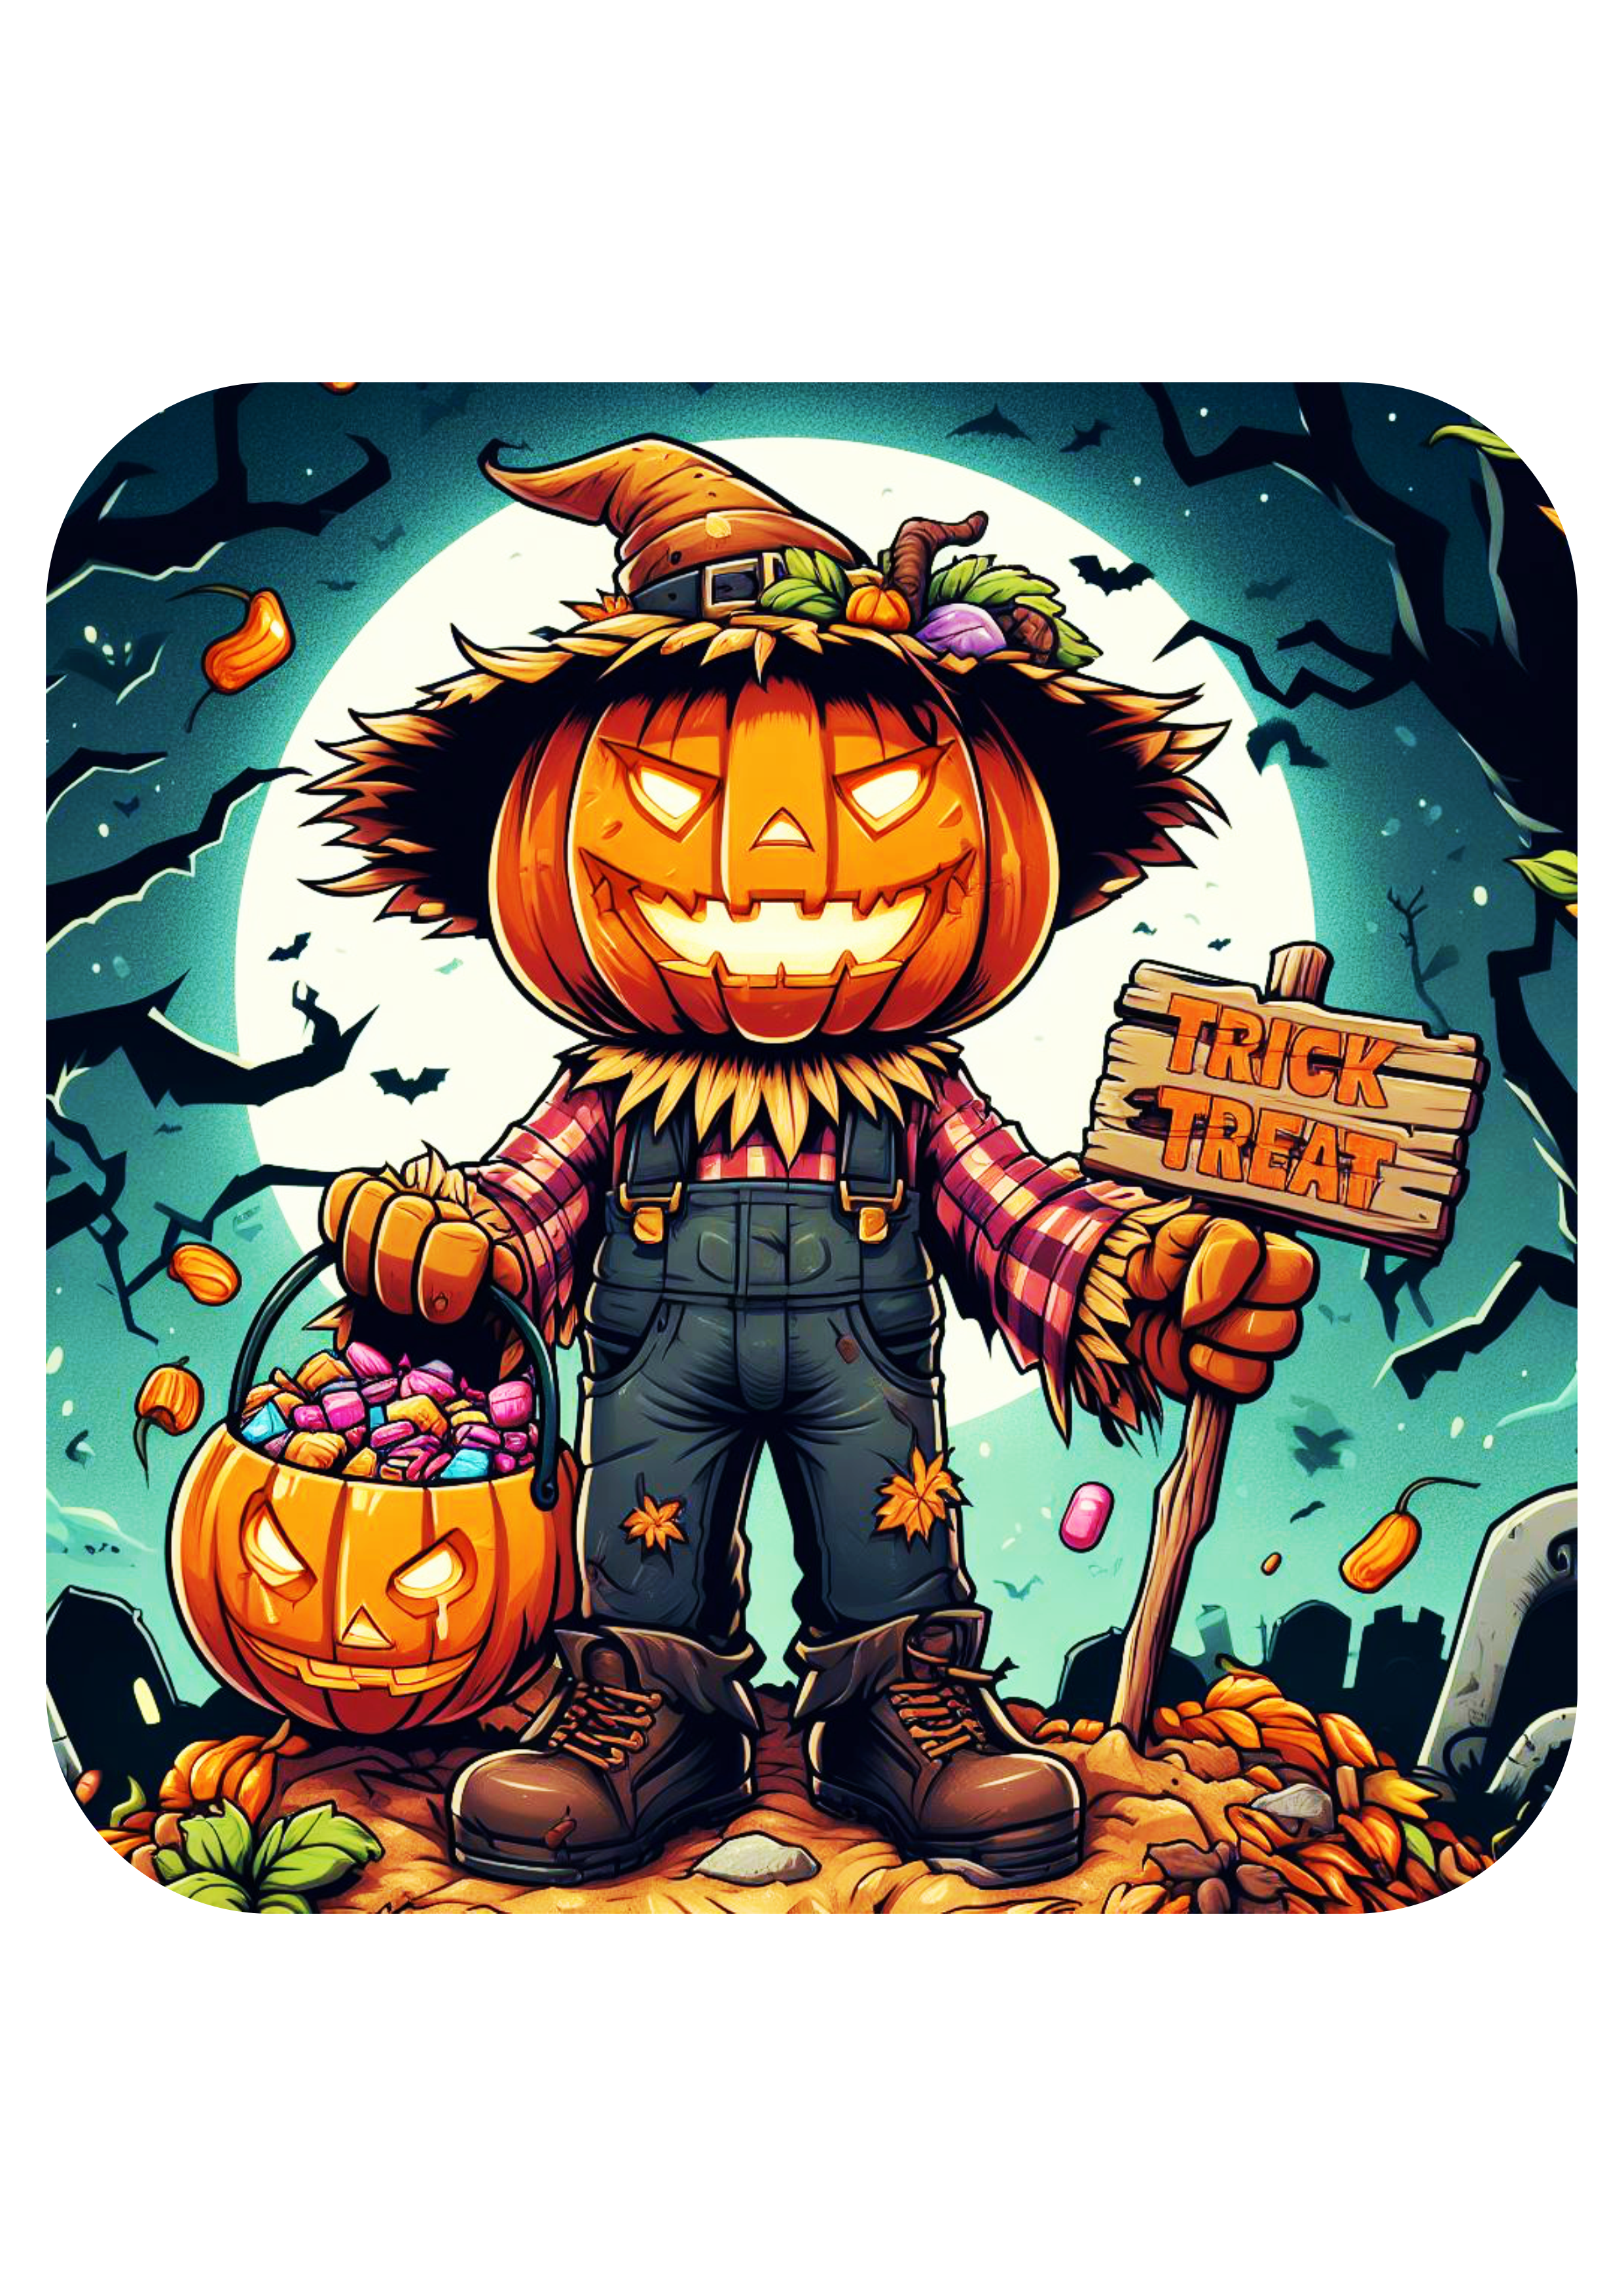 Trick or treat pumpkin halloween scary image full moon cemetery png